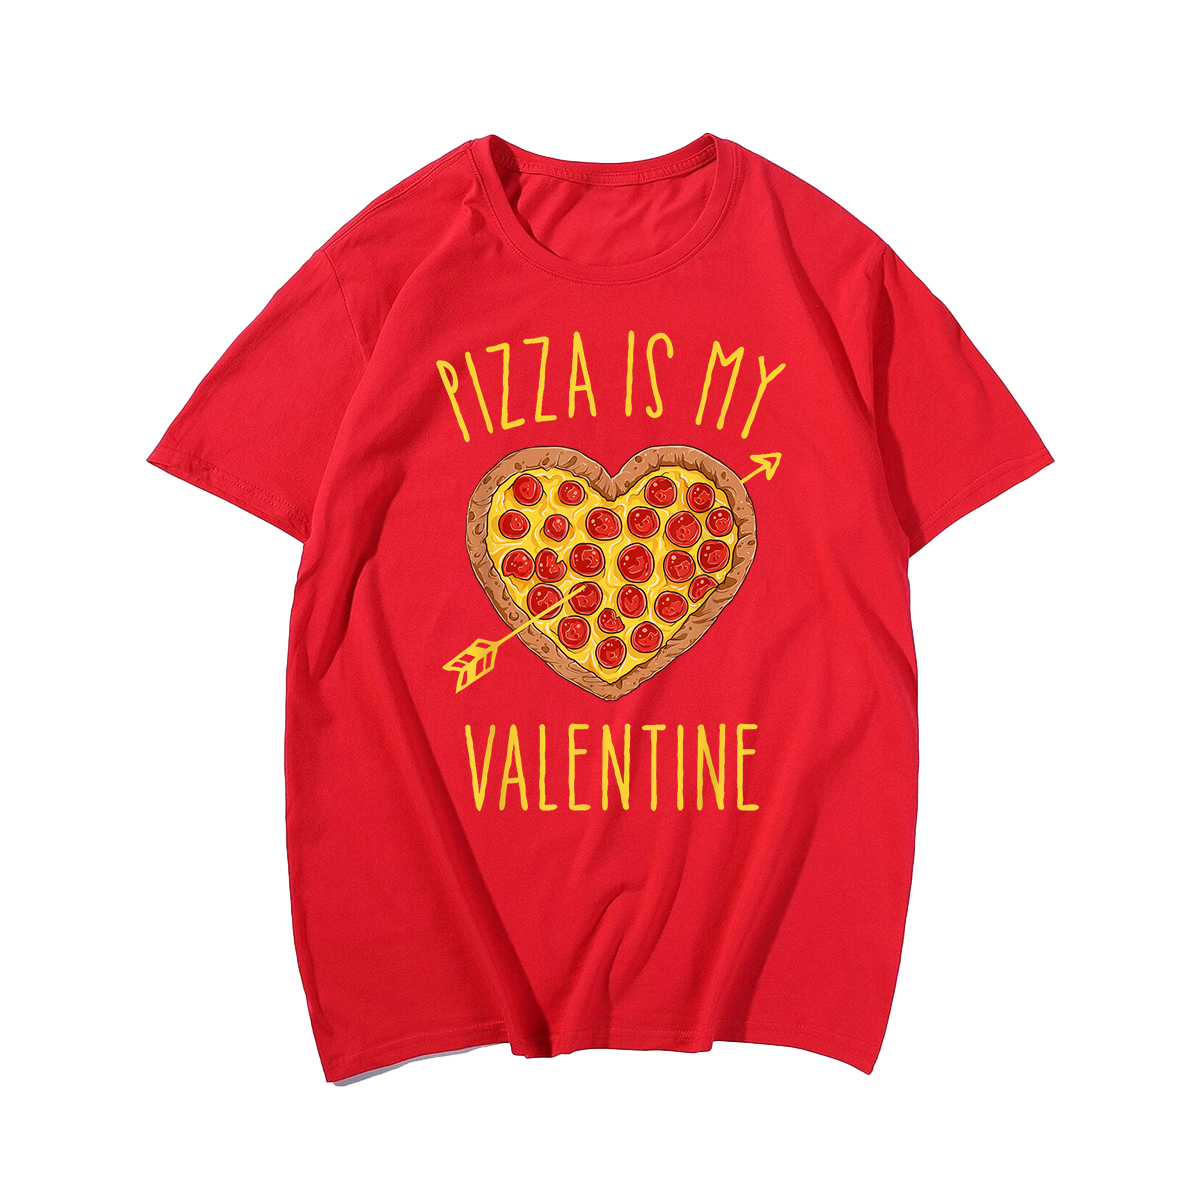 Pizza Is My Valentine Valentines Day T-Shirt, Men Plus Size Oversize T-shirt for Big & Tall Man